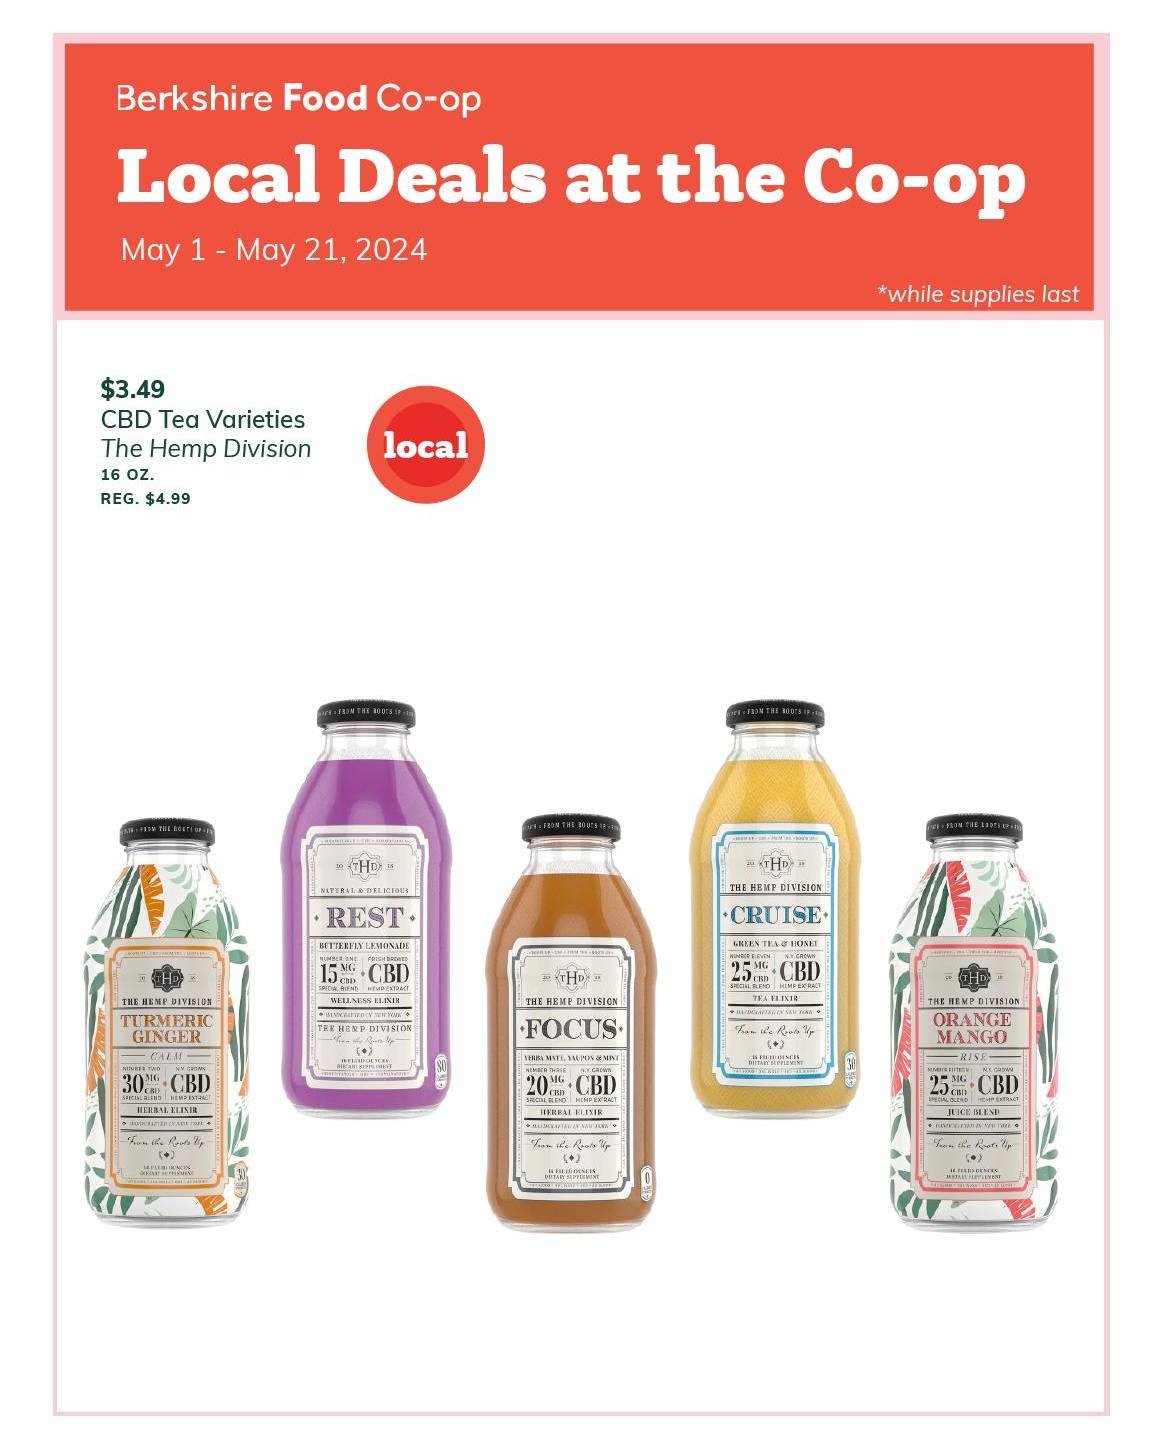 Local vendors offer special discounts to our community 🐝 Check out these deals, valid through May 21st! #shoplocal #berkshirecoop #greatbarrington #intheberkshires #savethebees #mellowmood